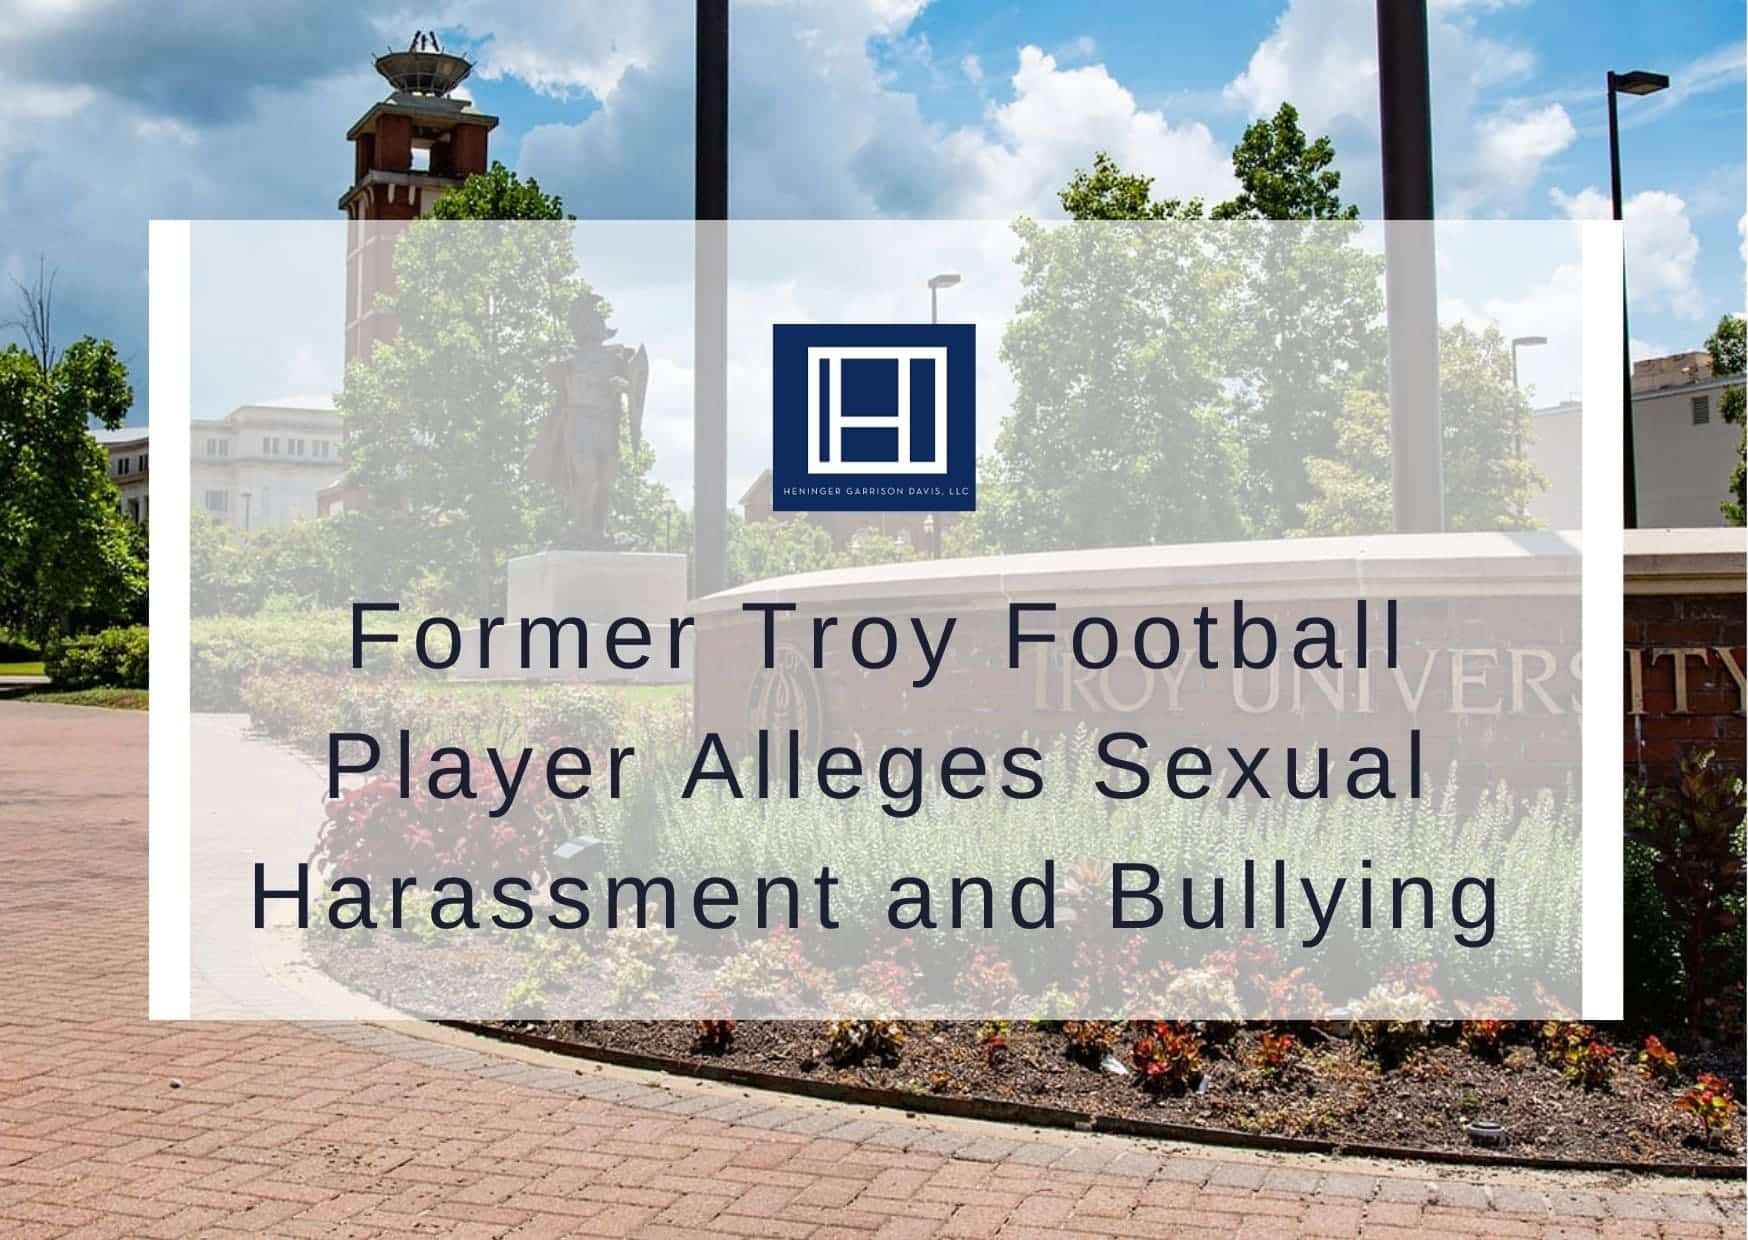 Former Troy Football Player Alleges Sexual Harassment and Bullying